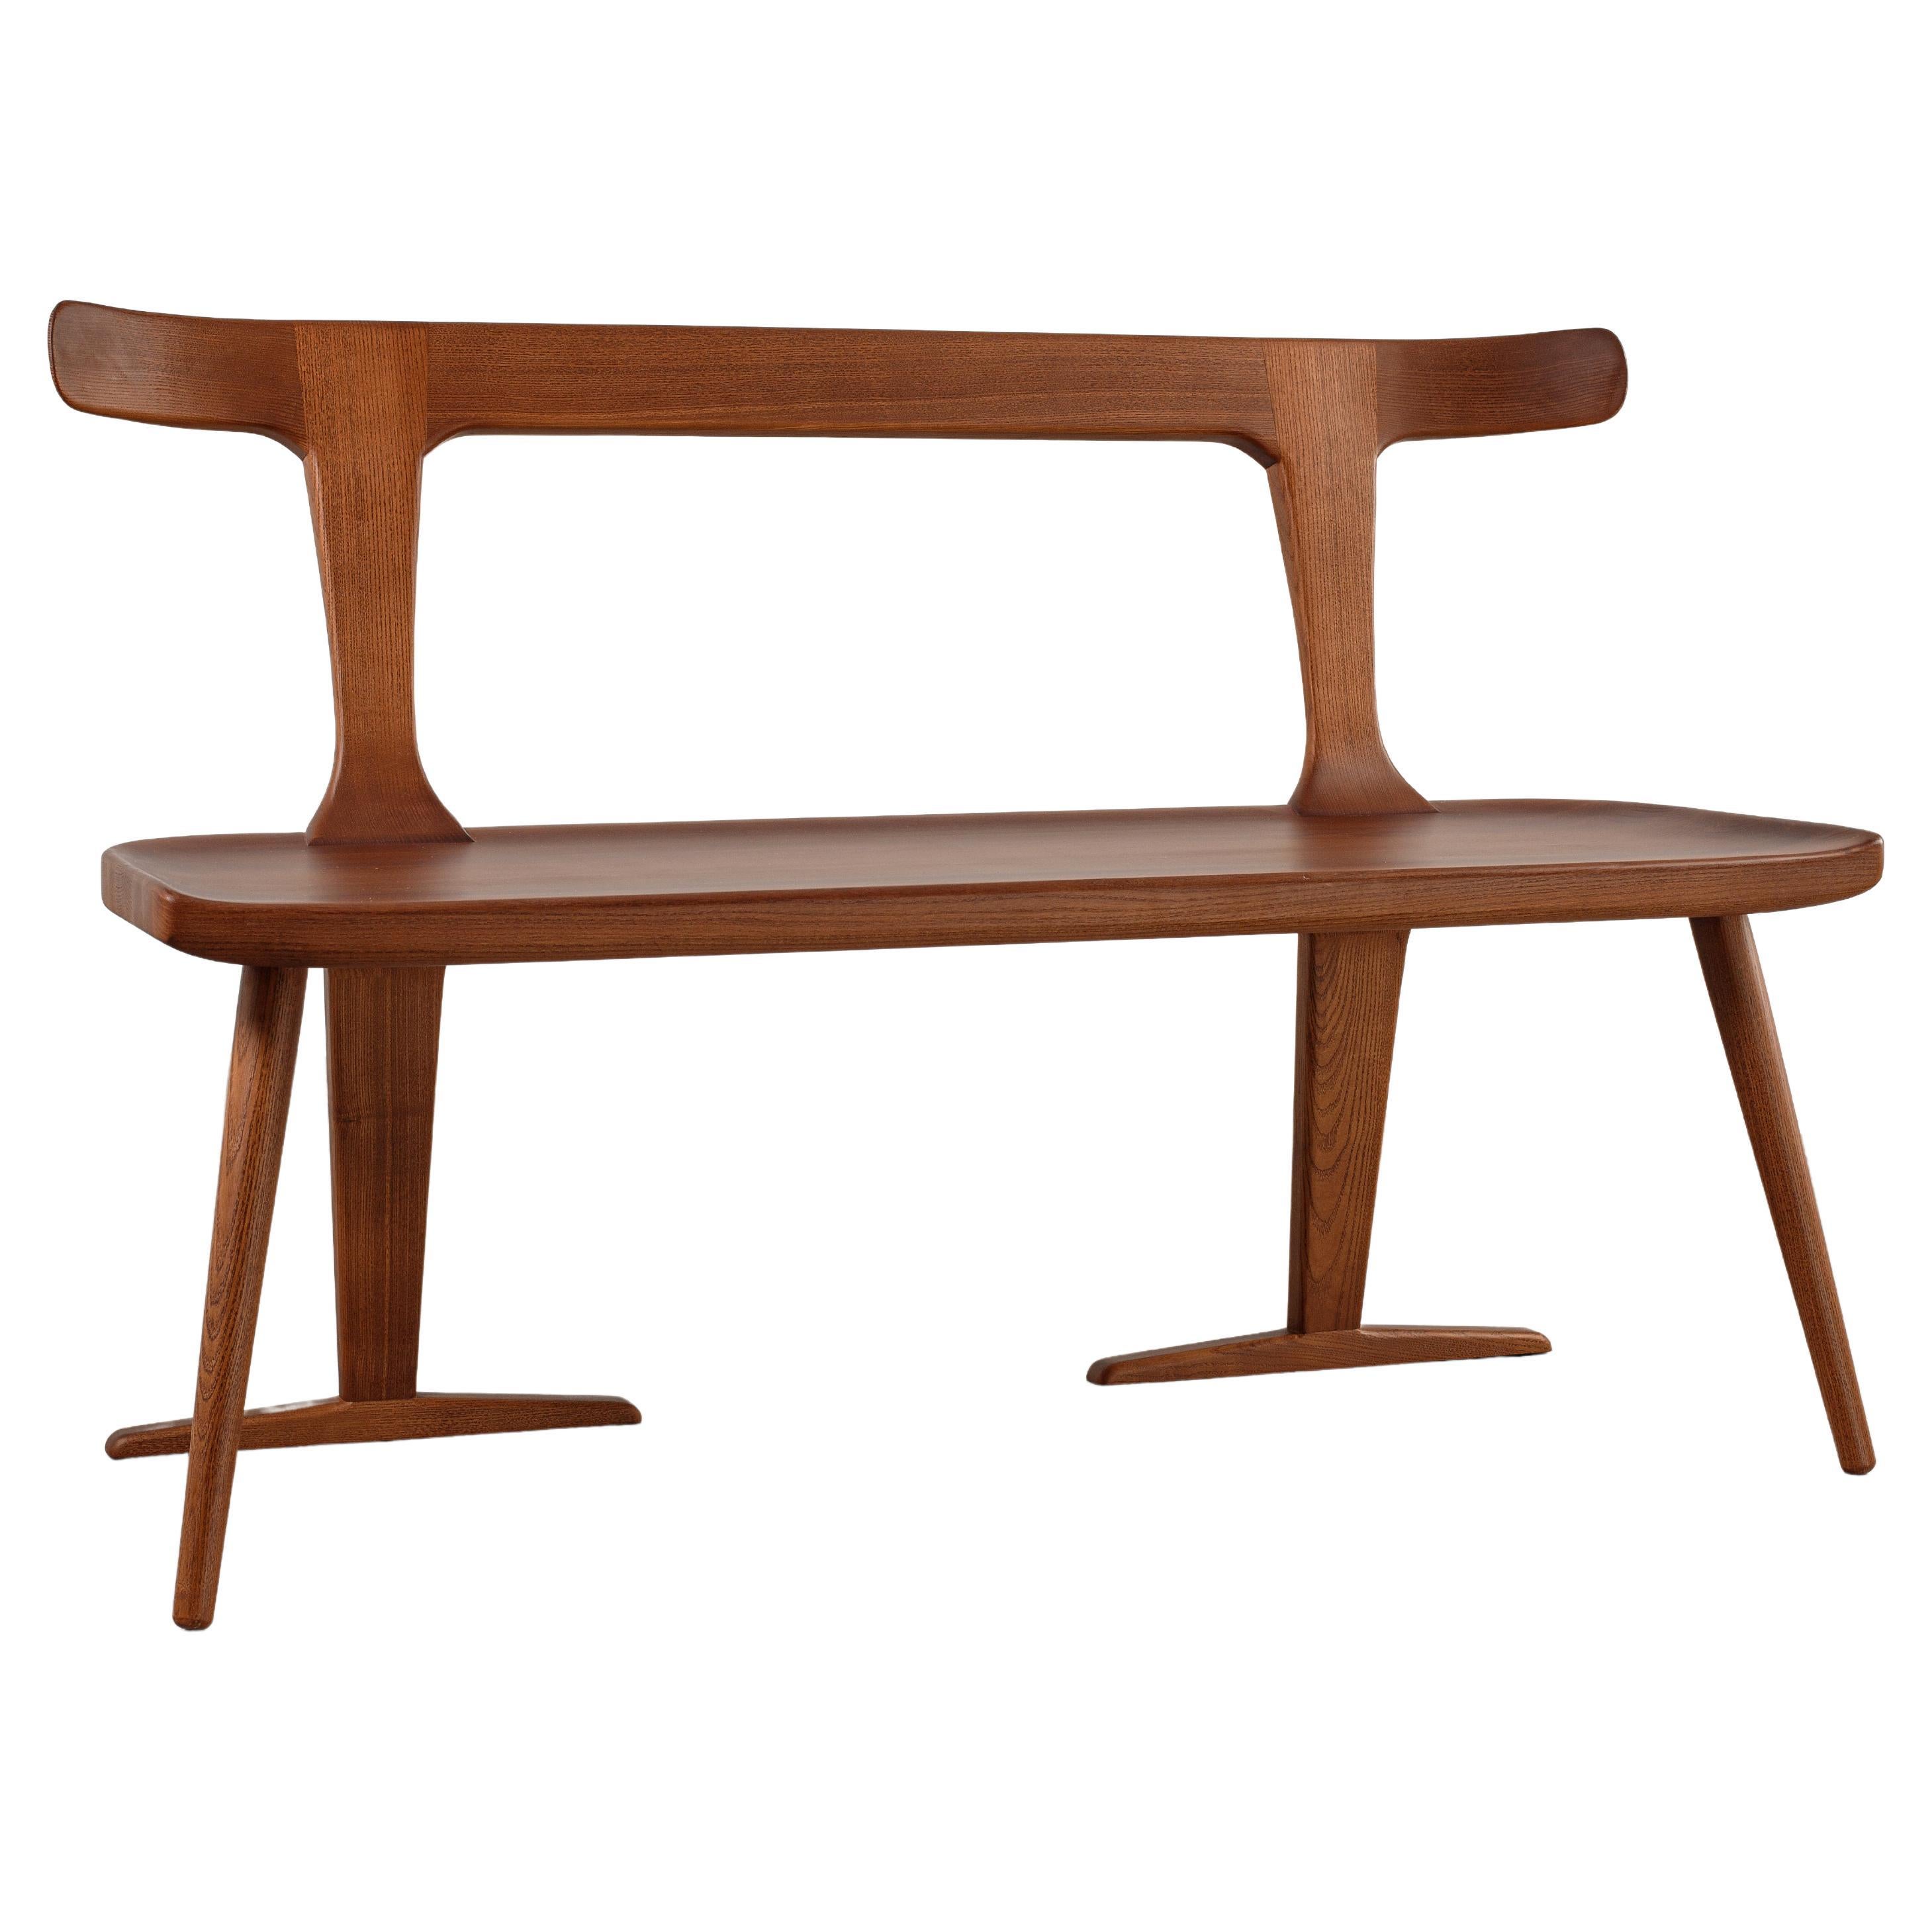 Brown Ash Solid Wood Bench, Entryway Wood Bench